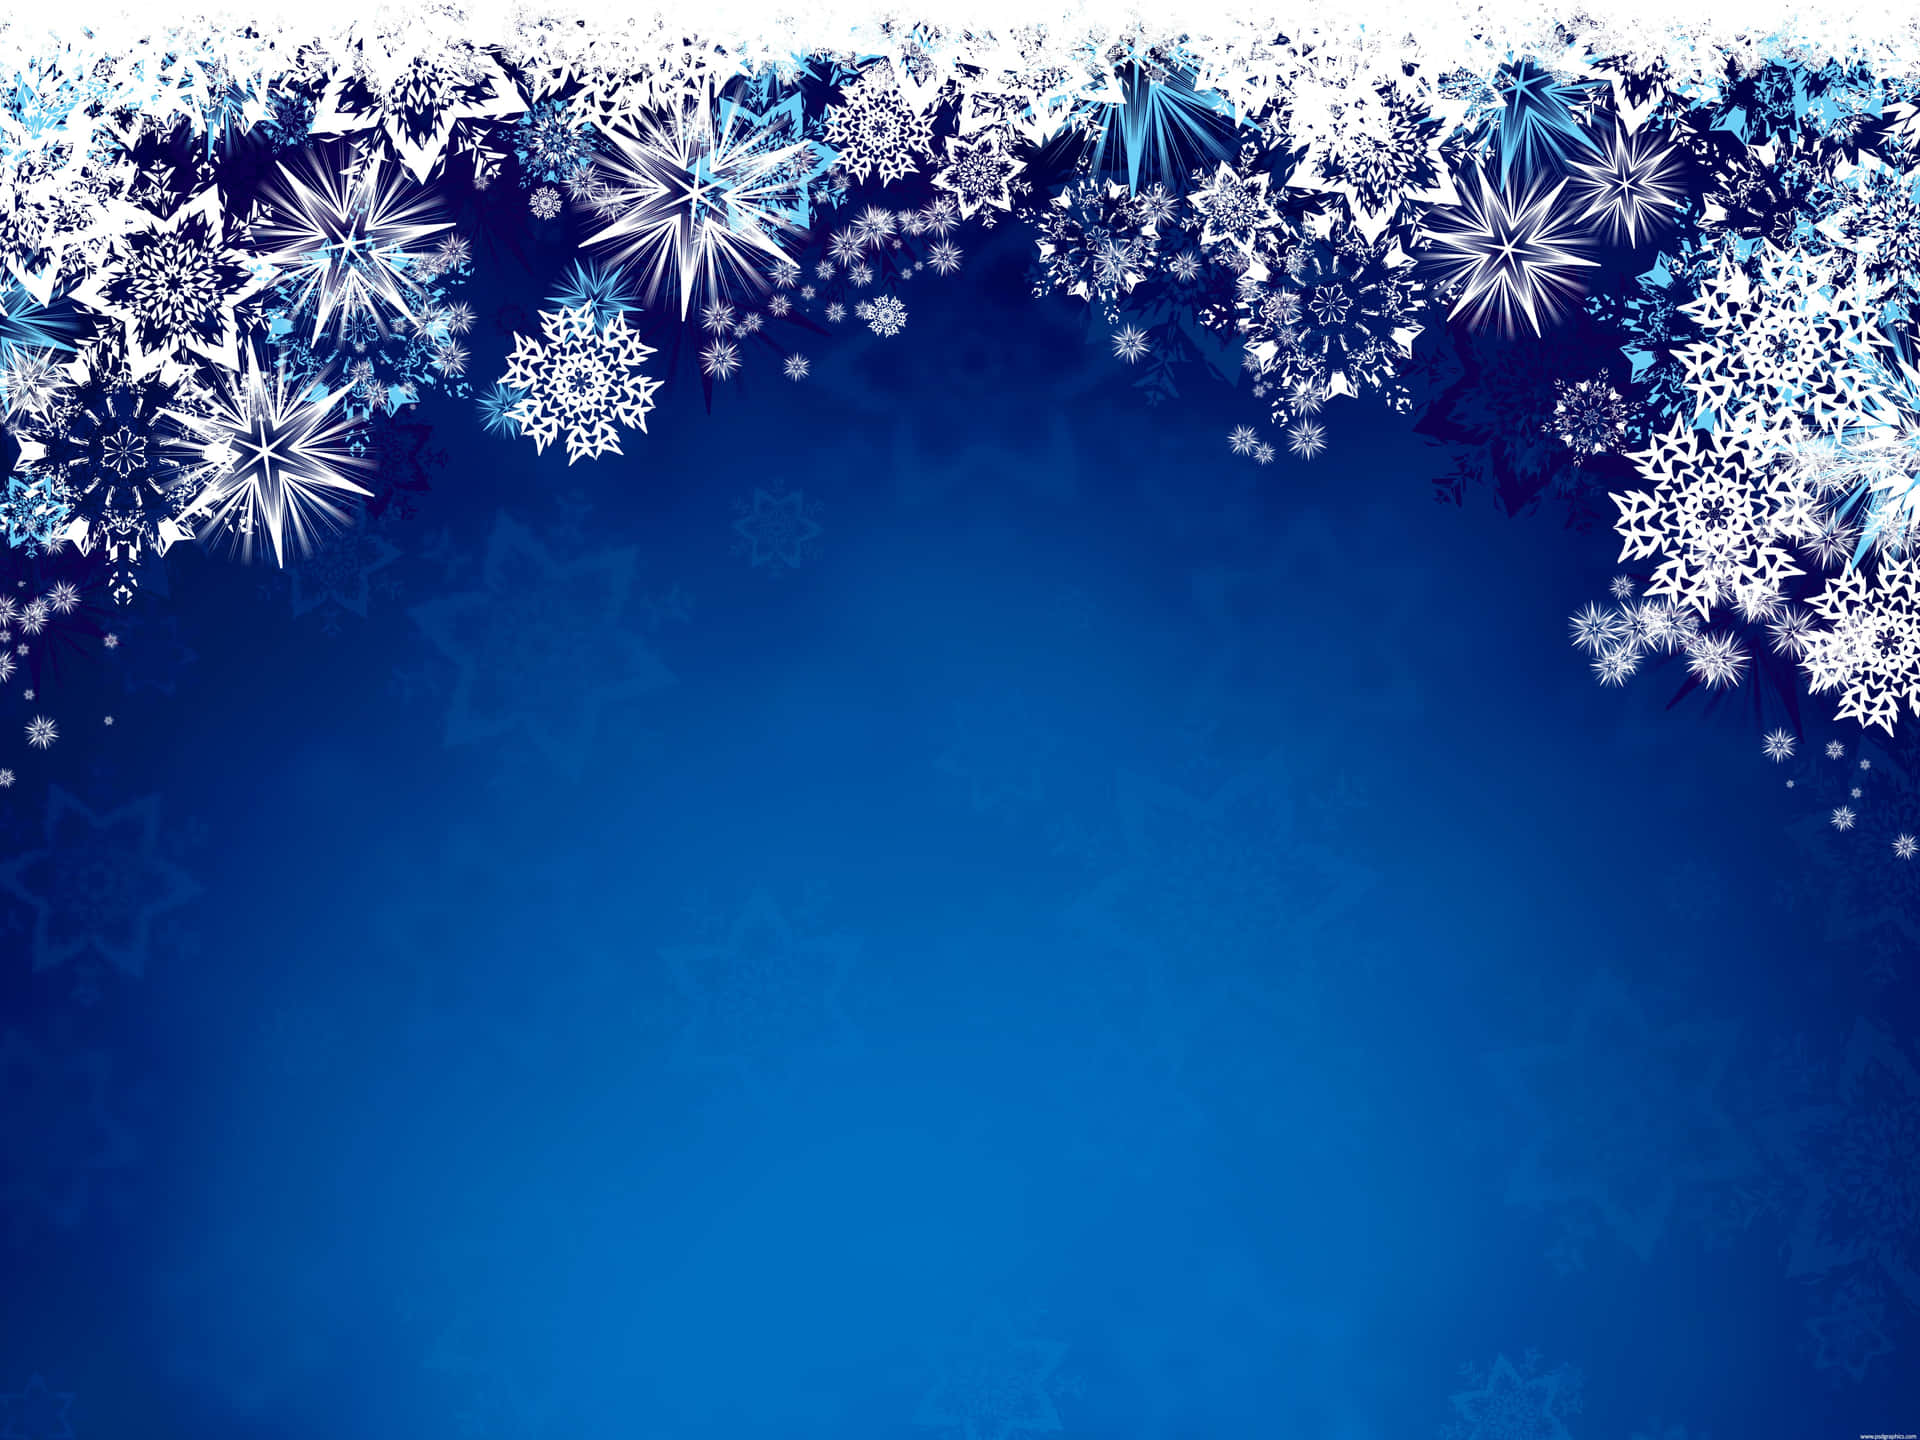 Artistic Snowflakes For Snow Background